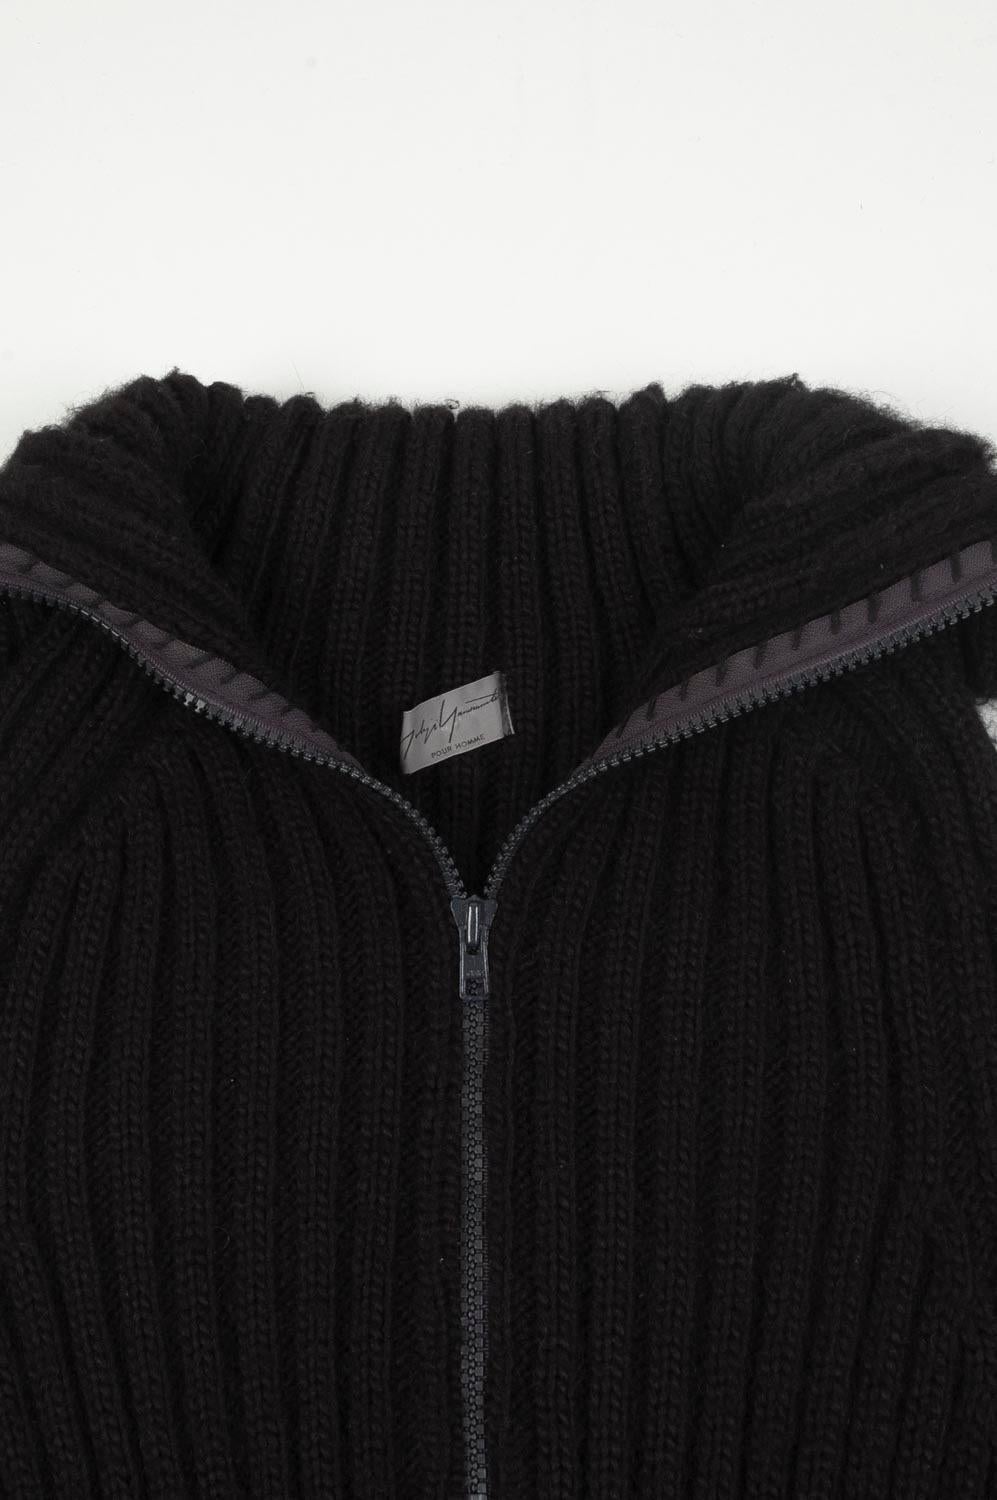 Check my other listings. Have many more designer clothes for sale. Open to any offers.
Item for sale is 100% genuine Yohji Yamamoto Pour Homme Turtle Neck Zip Men Heavy Knit long Sweater, S527
Color: Black
Material: 70% acrylic, 15% wool, 15%